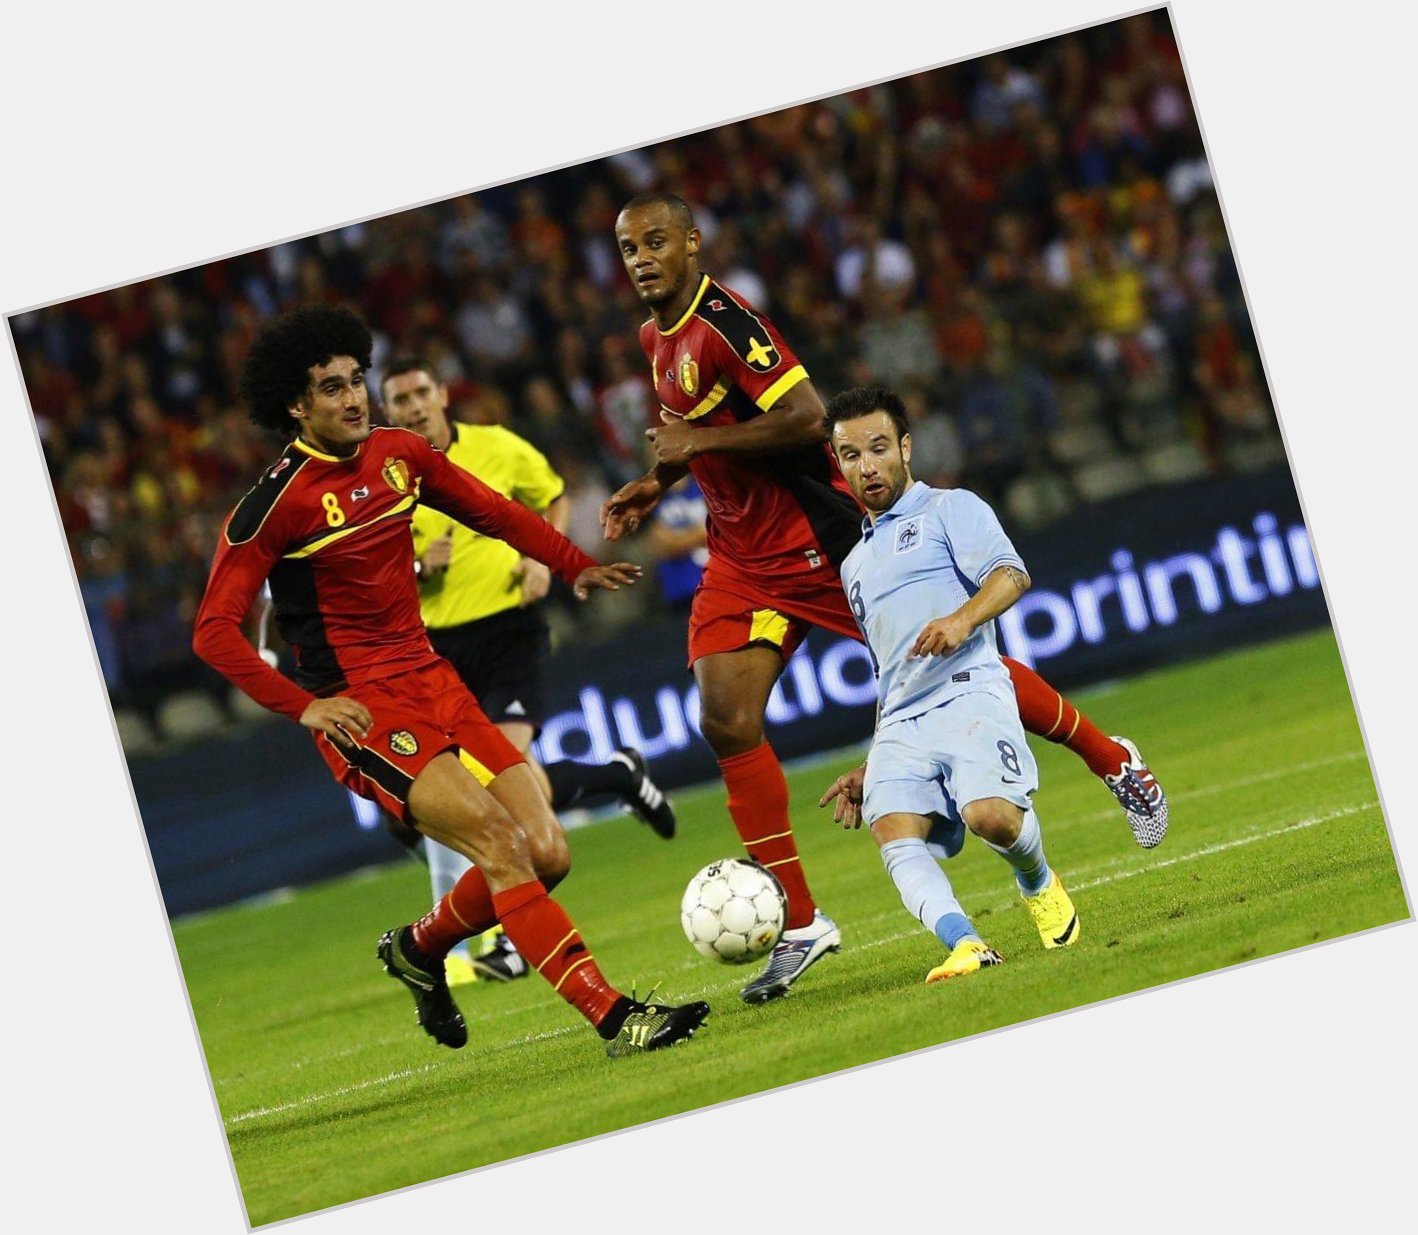 Happy birthday, Mathieu Valbuena! Throwback to one of the greatest football pics of all time 